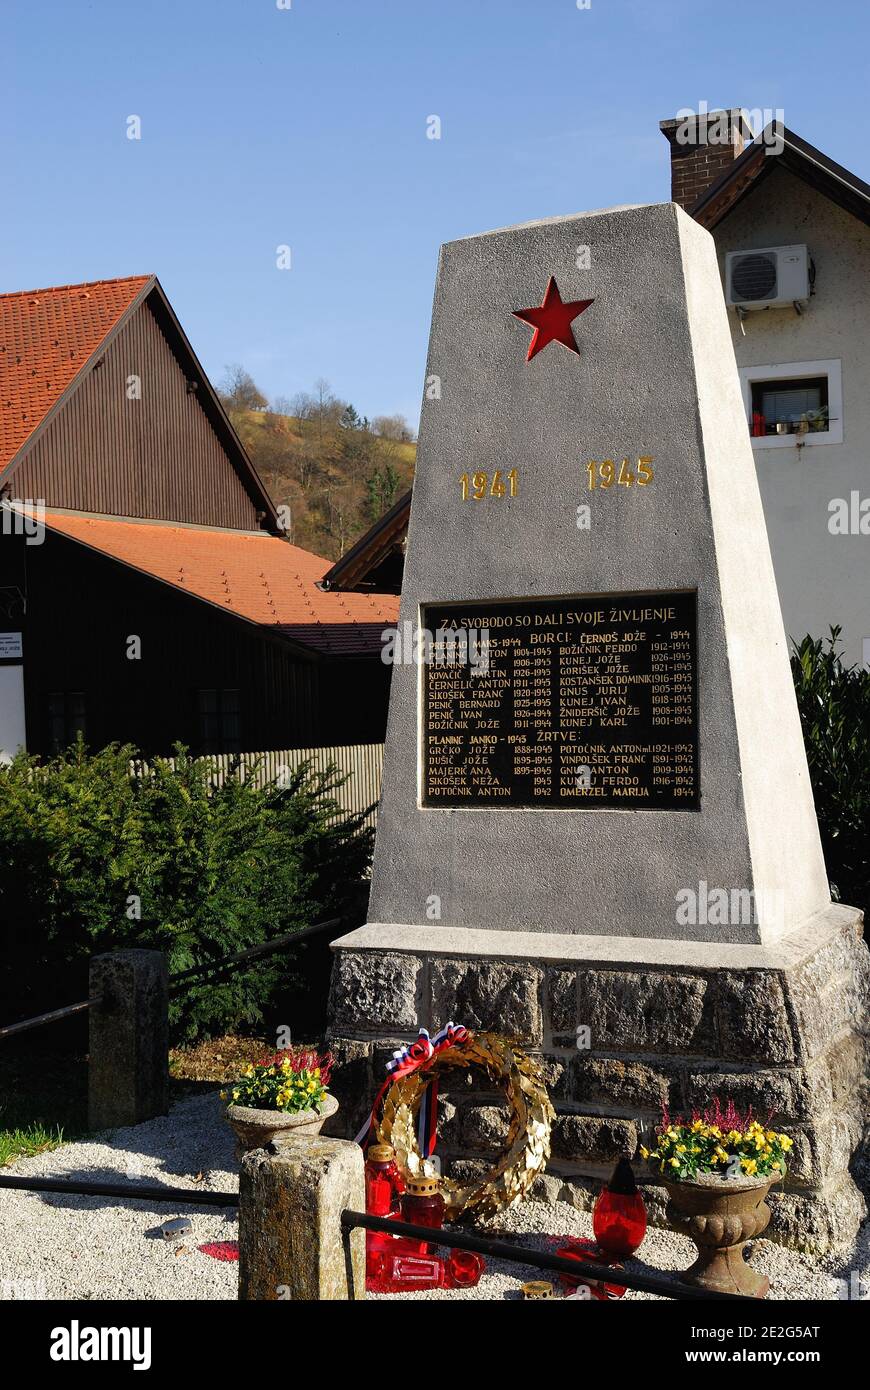 Bistrica, Slovenia. The monument in memory of the civilian and partisan victims of the Nazis during the WWII. Stock Photo